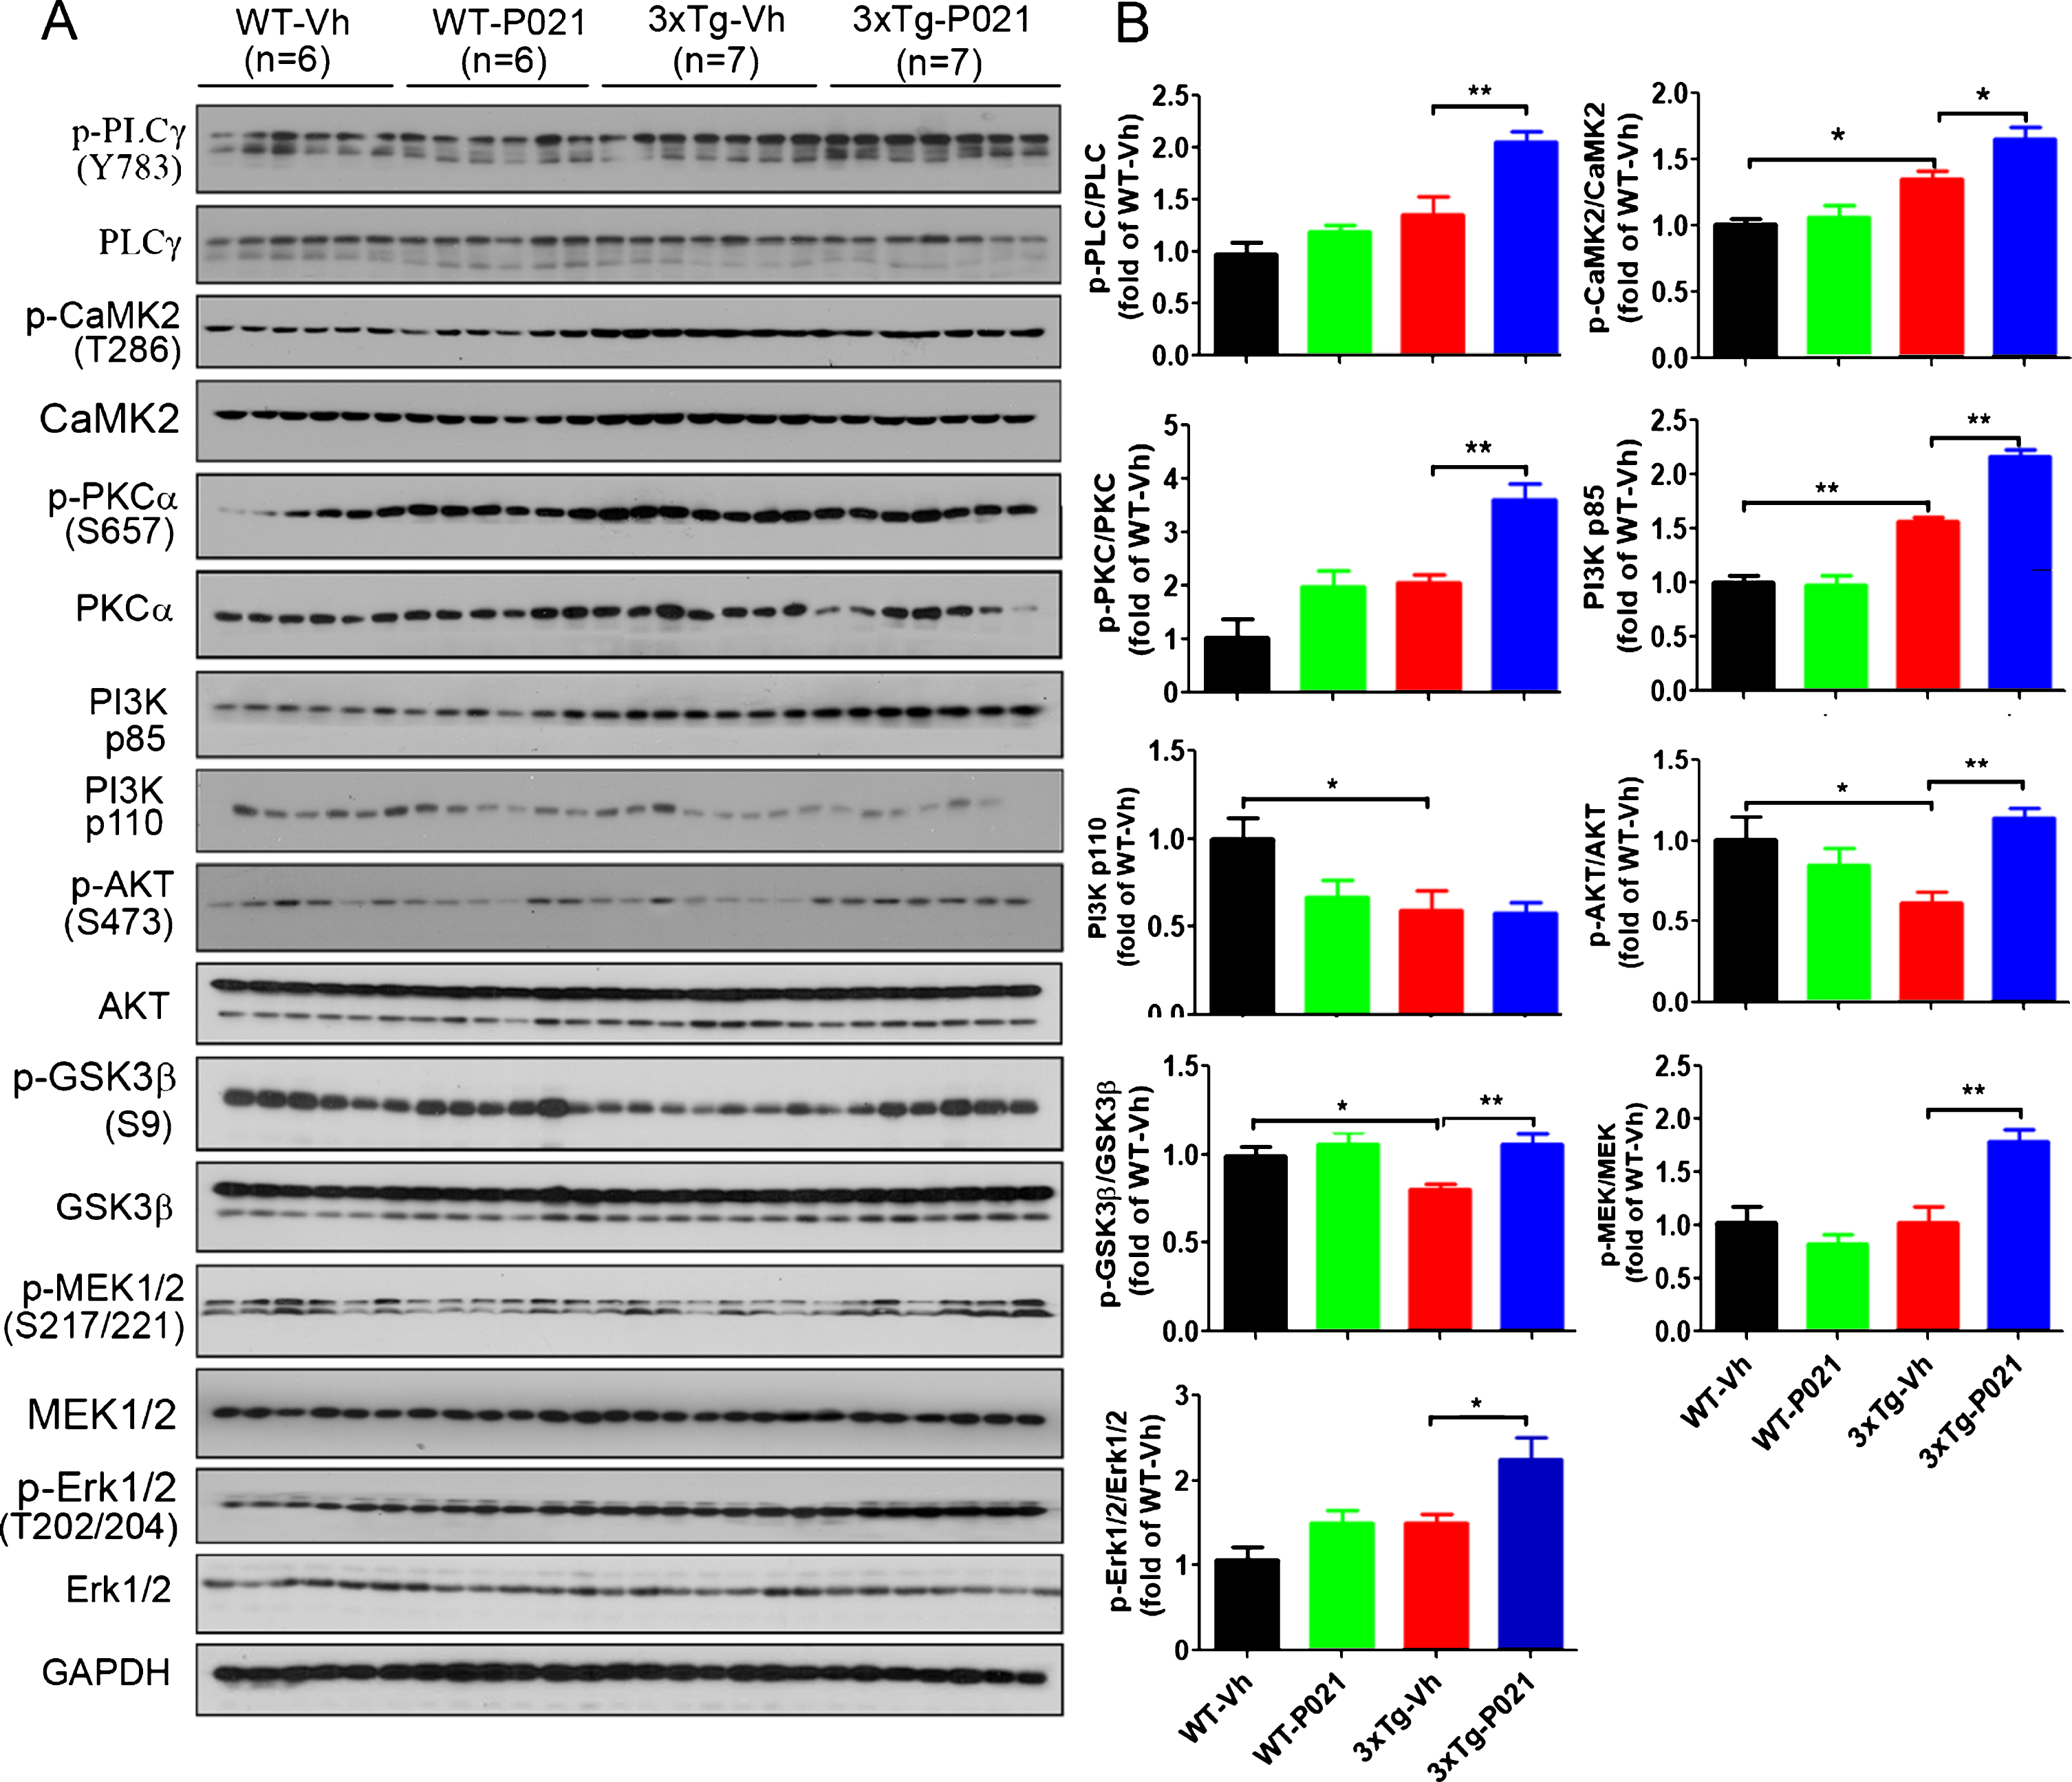 P021 treatment activates BDNF-TrkB signaling pathway in 3xTg-AD mice. A) Protein levels of PLCγ, CaMK2, PKC, PI3K, AKT, GSK3β, MEK, and ERK in cortex were determined by western blots. B) Densitometric quantifications of blots were normalized to those of GAPDH blots employed as a loading control. P021 treatment increased the ratios of p-PLCγ/PLCγ (p = 0.0016), p-CaMK2/CaMK2 (p = 0.0107), p-PKC/PKC (p = 0.0004), PI3K p85 (p = 0.0001), p-AKT/AKT (p = 0.0001), p-GSK3β/GSK3β (p = 0.0047), p-MEK/MEK (p = 0.0019), and p-ERK/ERK (p = 0.0208) in the 3×Tg-AD mice. Data were analyzed by two-way ANOVA followed by a Tukey’s multiple comparisons test and are expressed as mean±S.E.M. *p < 0.05, **p < 0.01.